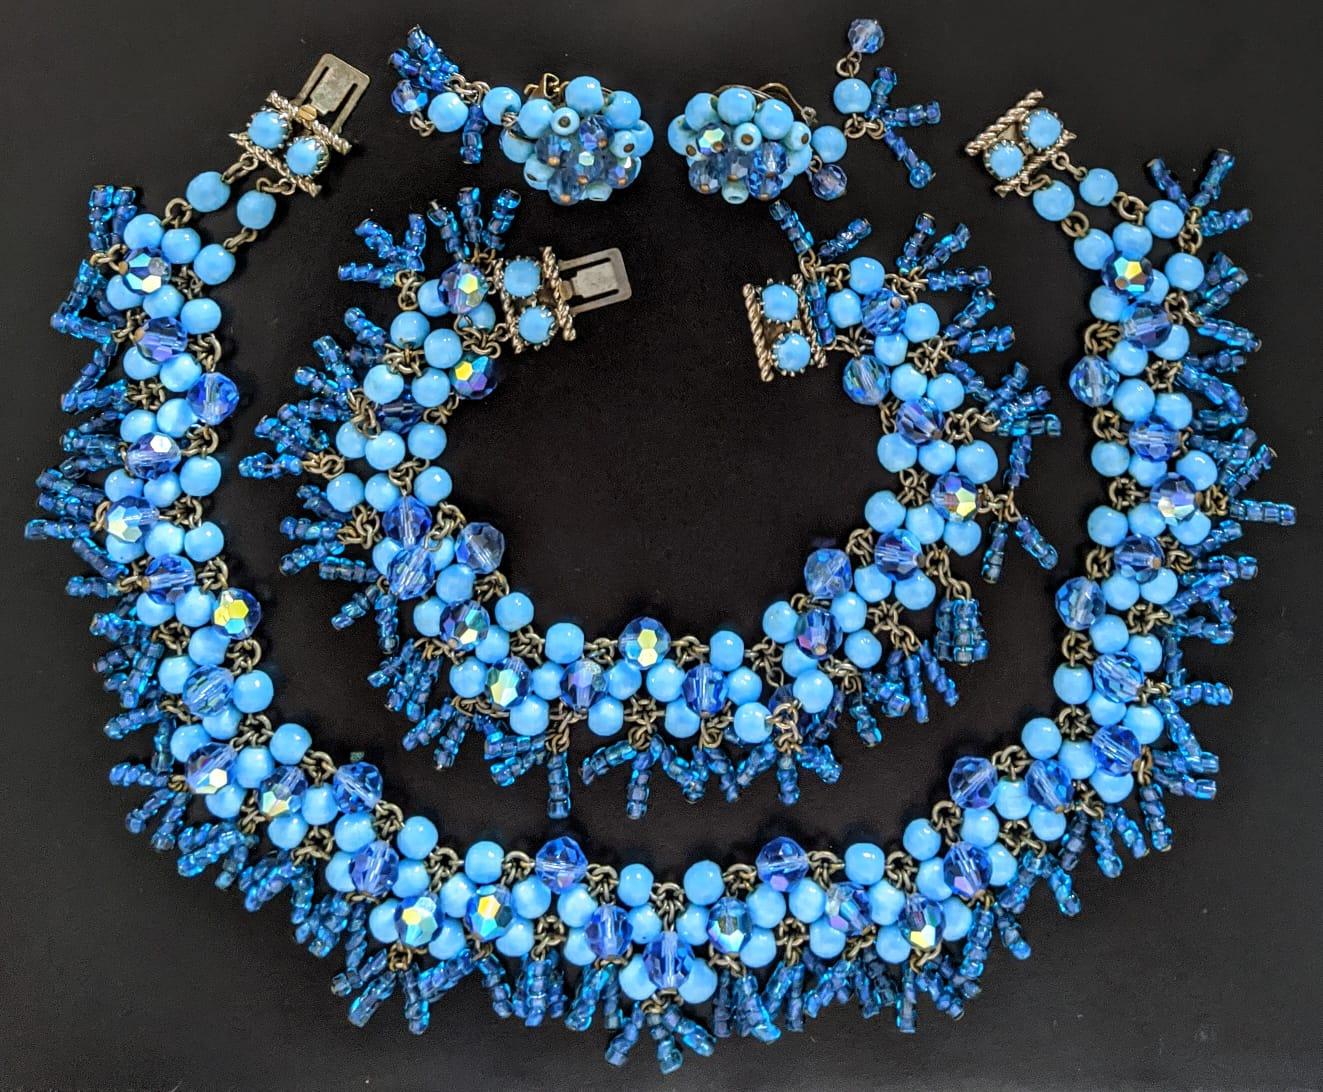 Magnificent and very RARE SET:
NECKLACE + BRACELET + EARRINGS Clips,
50s vintage,
in glass and glass paste,
by haute couture designer WOLOCH,
good condition.

BRACELET: length 20 cm, width 4 cm, weight 48 g,
COLLAR: length 37 cm, width 3.5 cm,